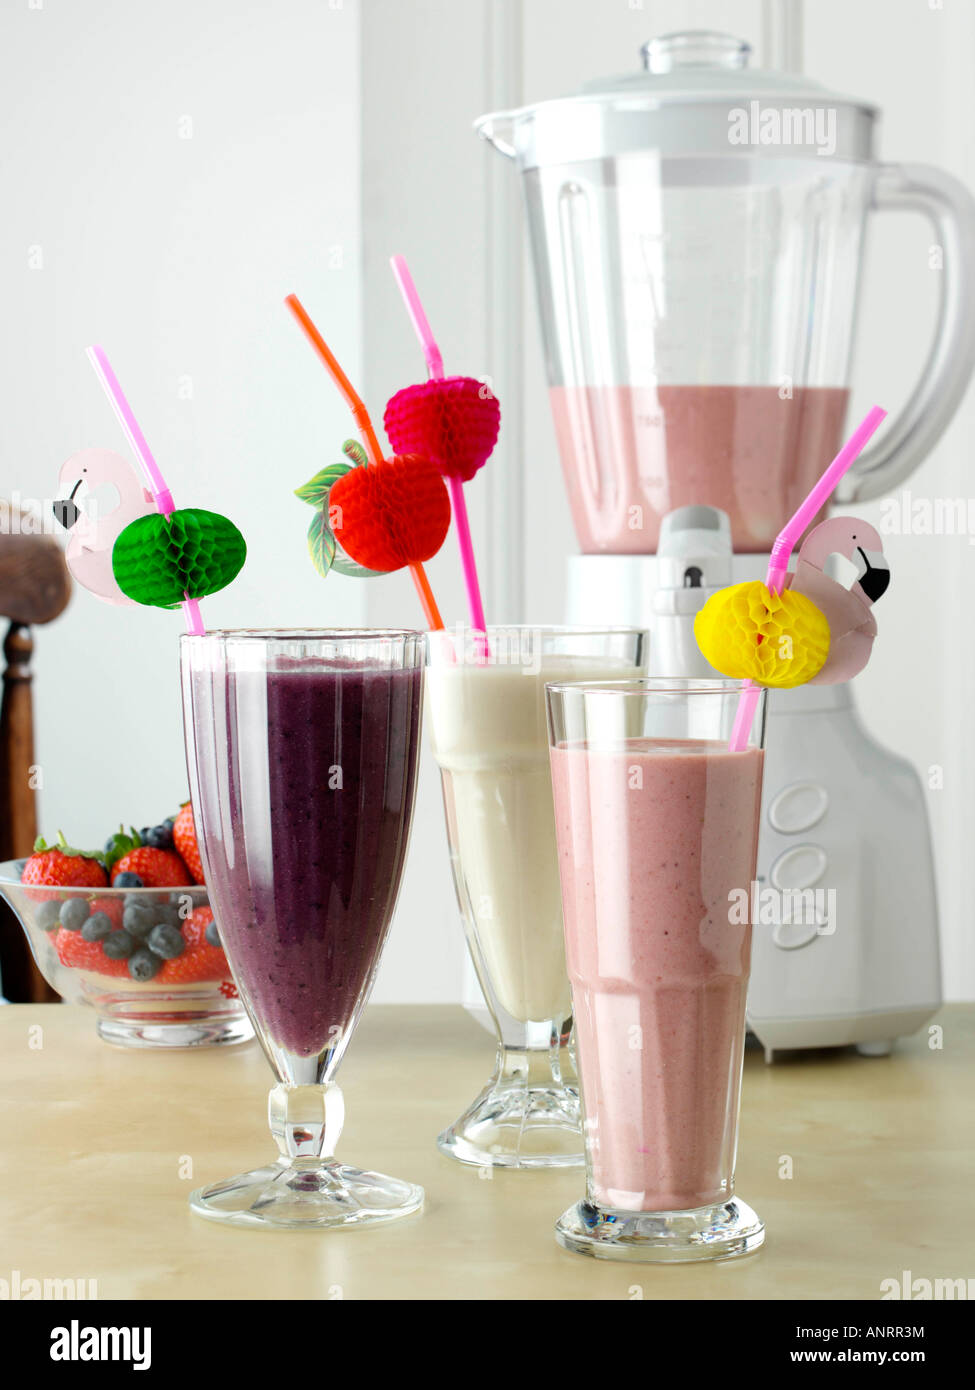 https://c8.alamy.com/comp/ANRR3M/blender-and-banana-strawberry-and-blueberry-mango-smoothies-healthy-ANRR3M.jpg